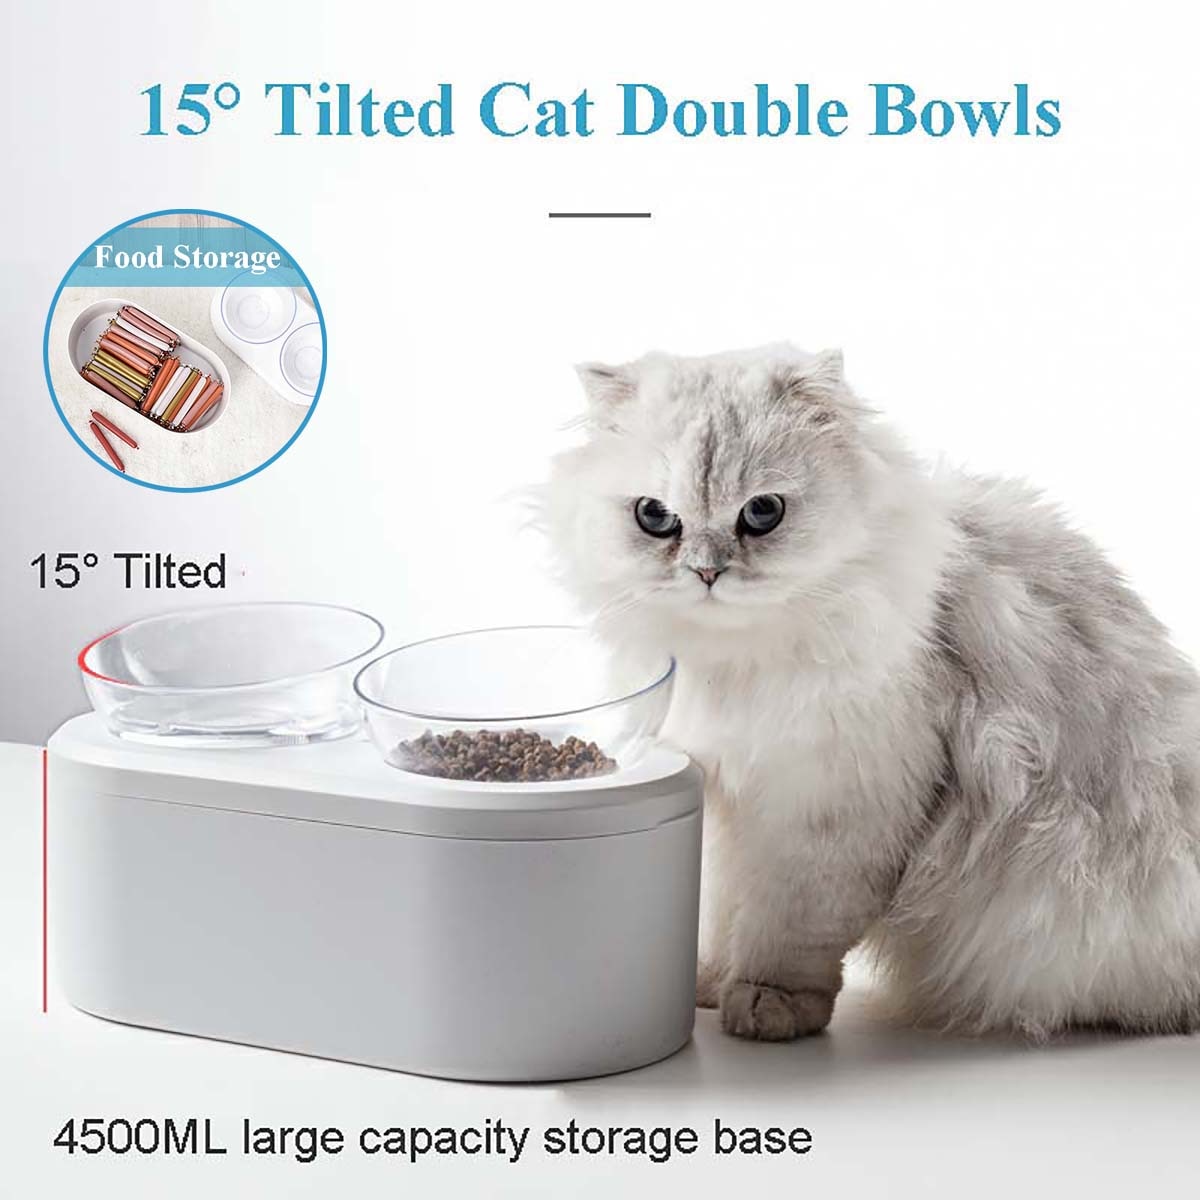 Raised Feeder With Detachable Food Storage With Double Water Bowl